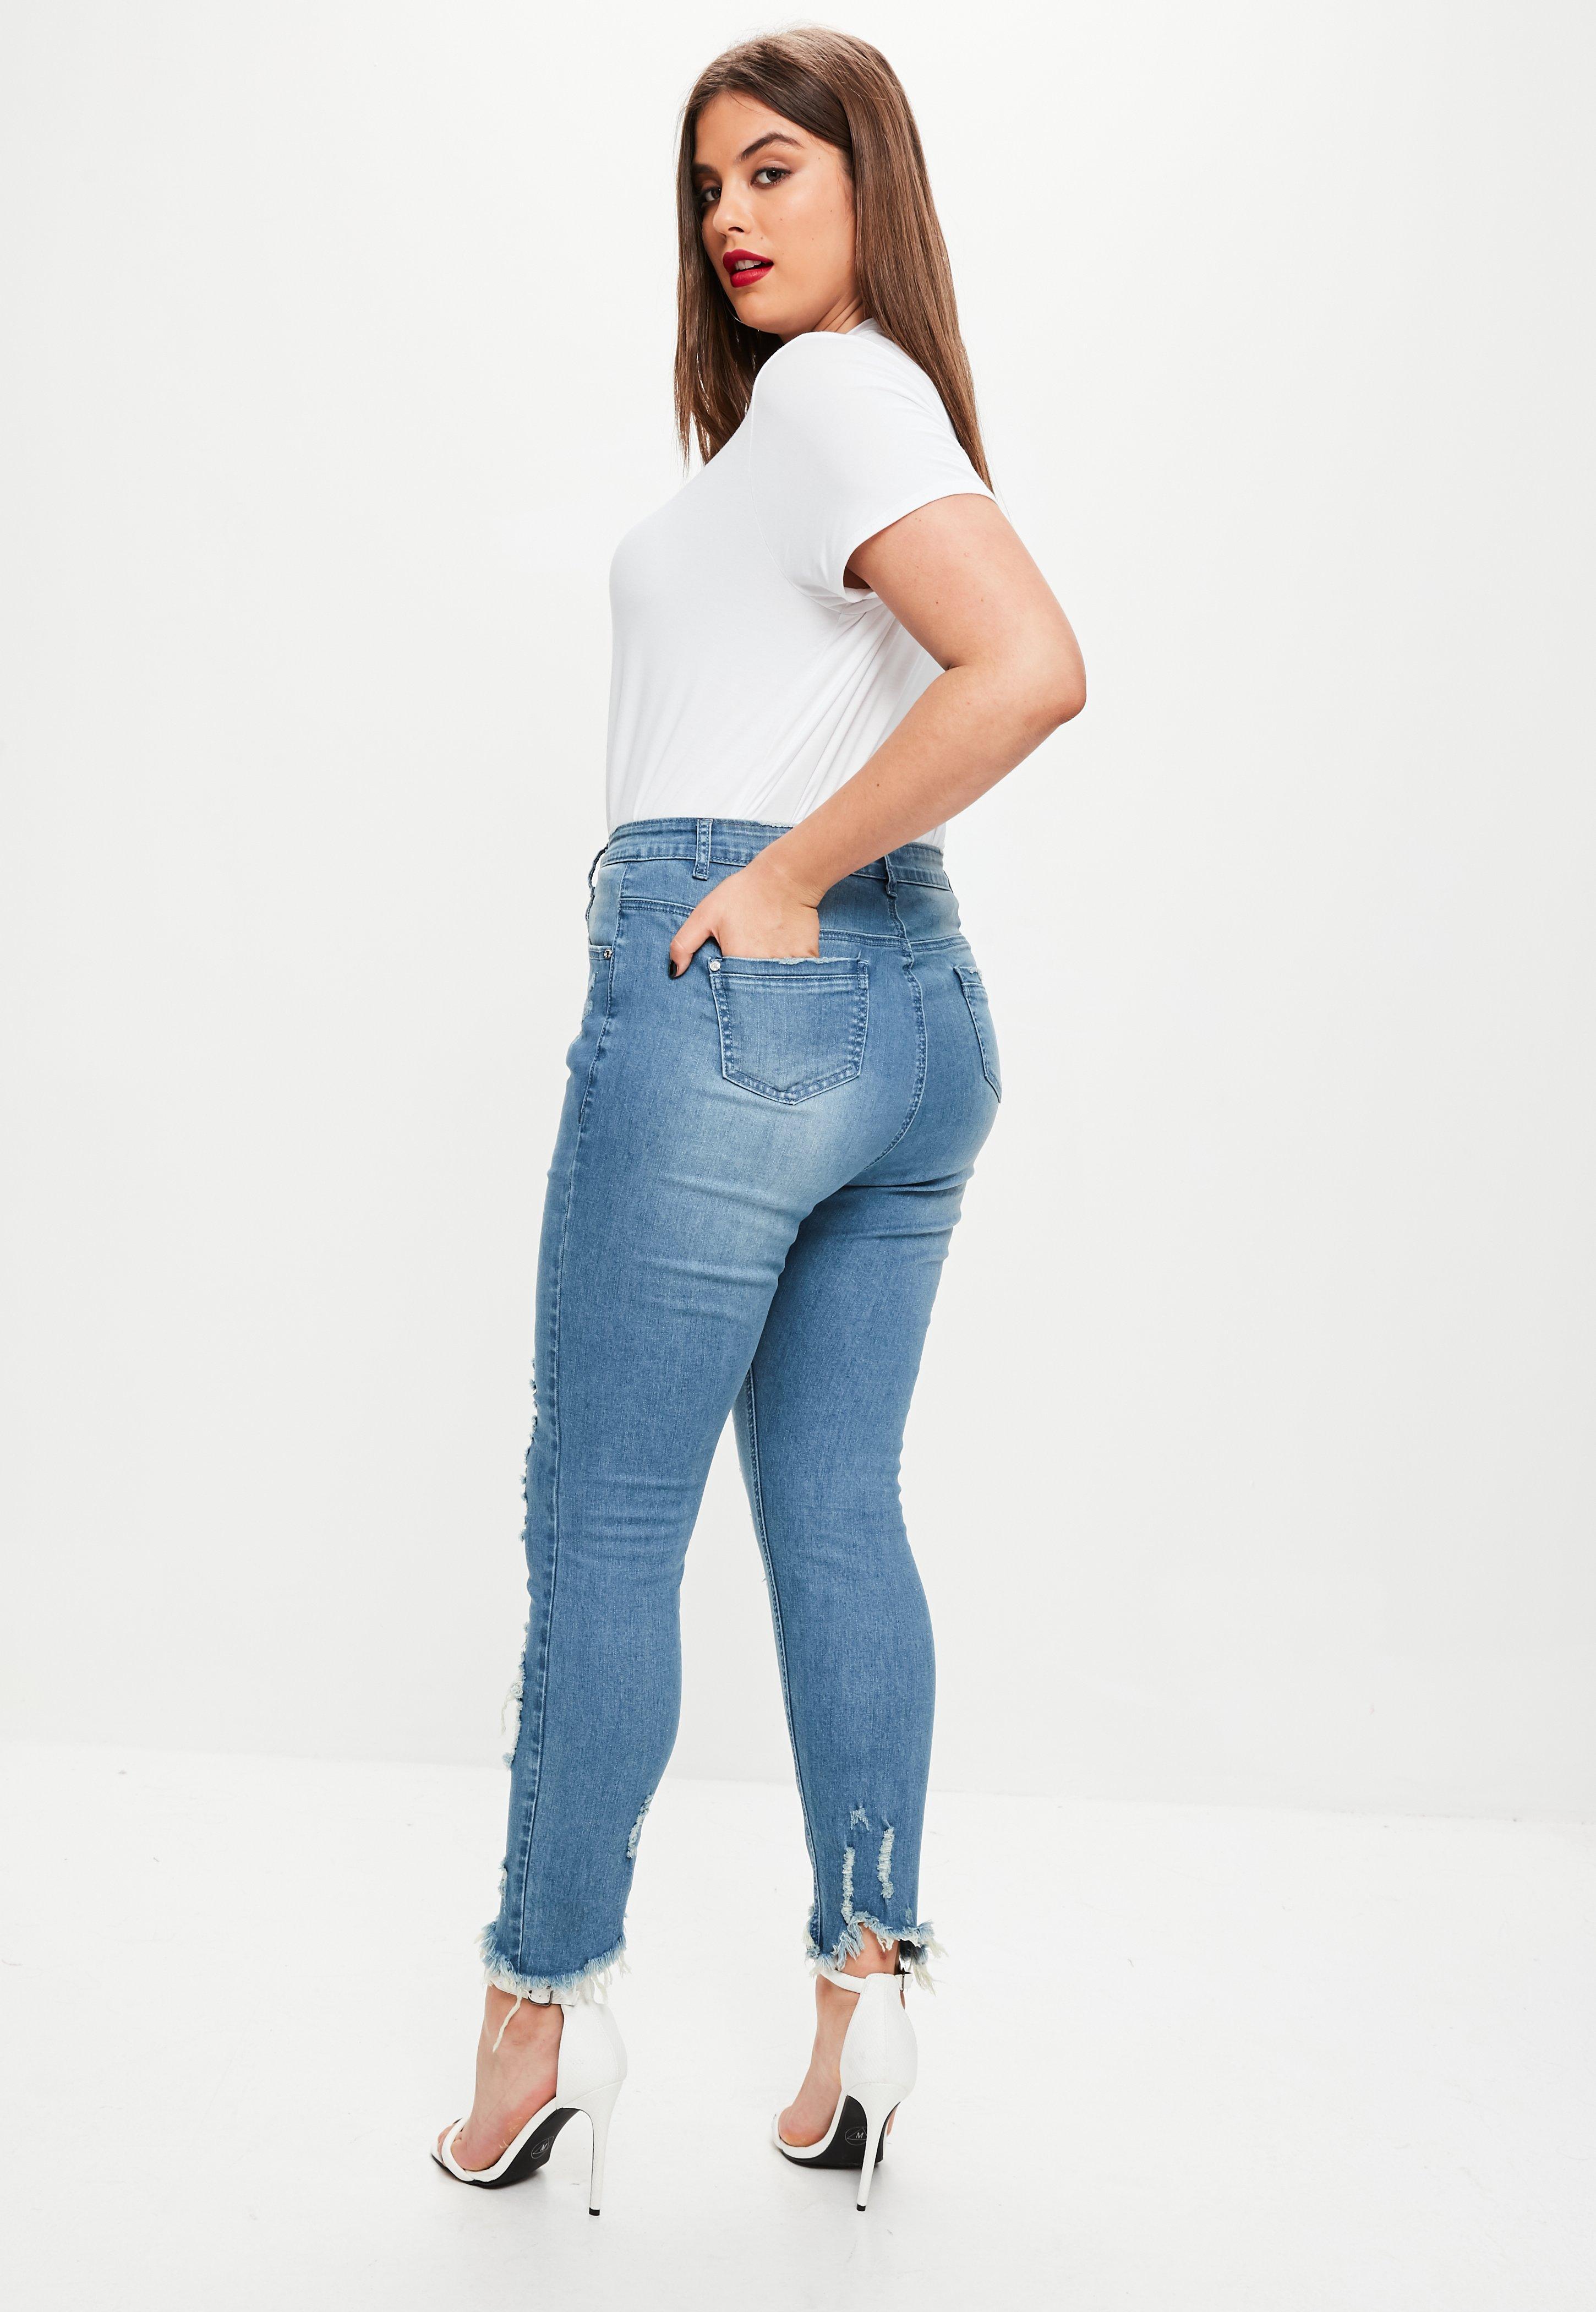 Lyst - Missguided Plus Size Blue Ripped Jeans in Blue